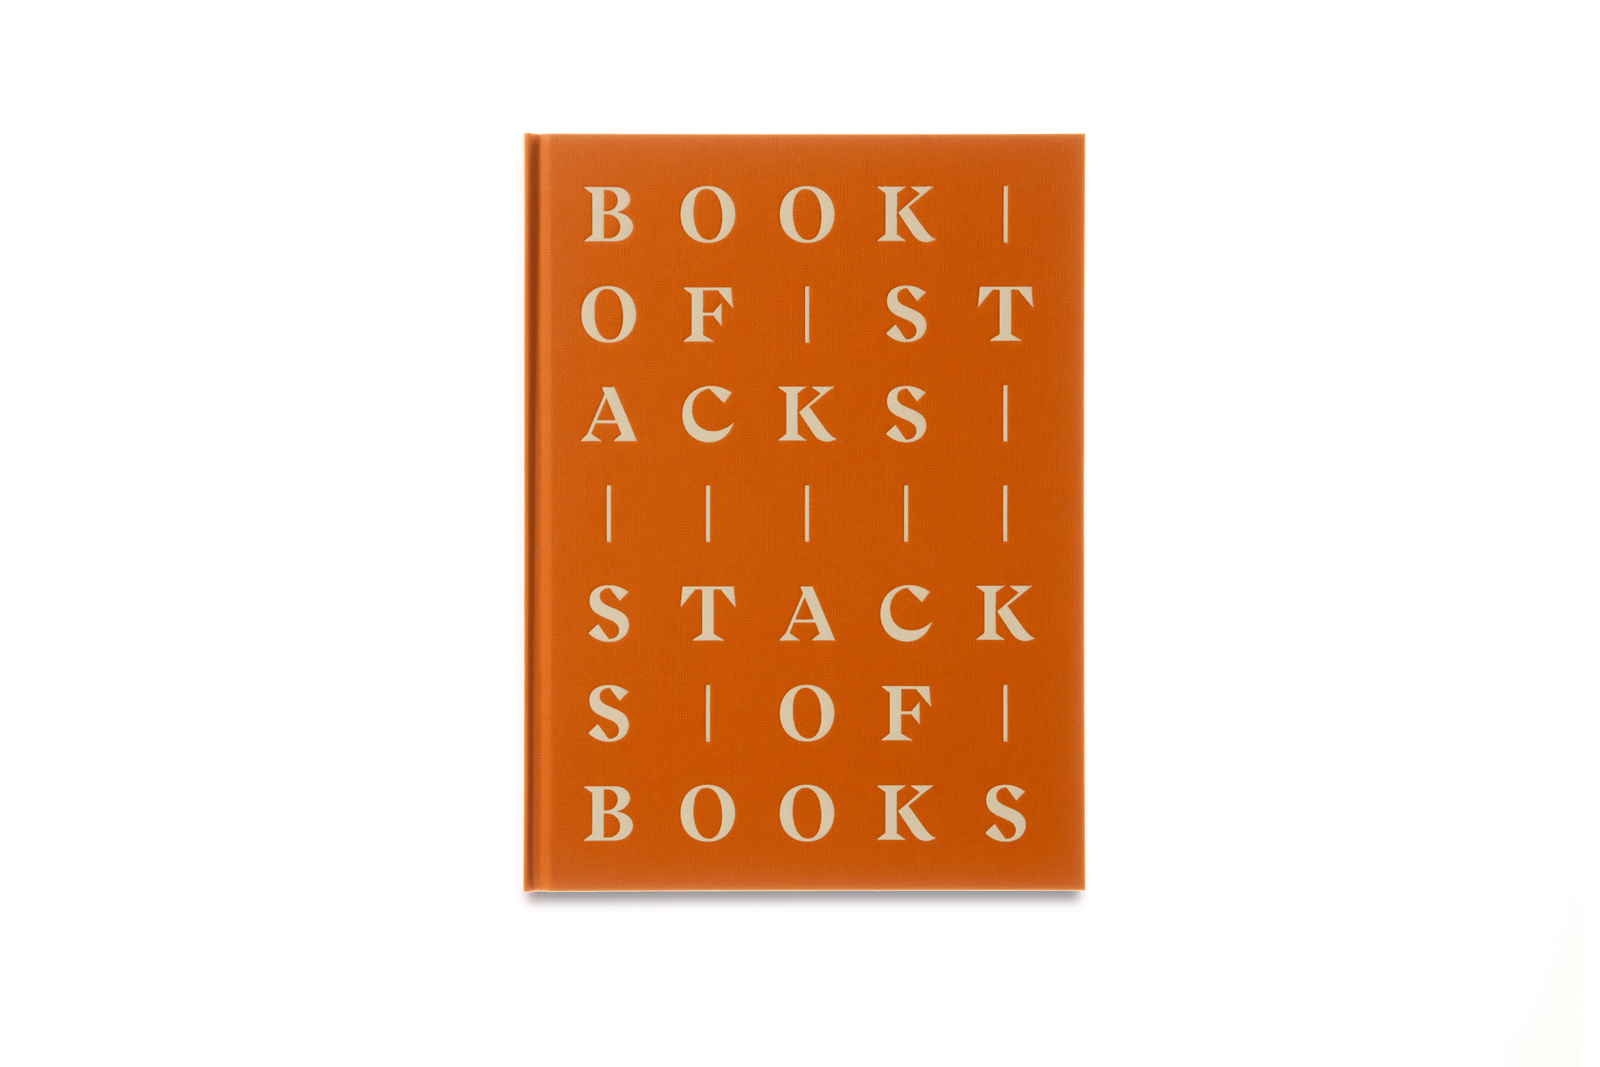 Book of stacks, Stacks of books - First edition